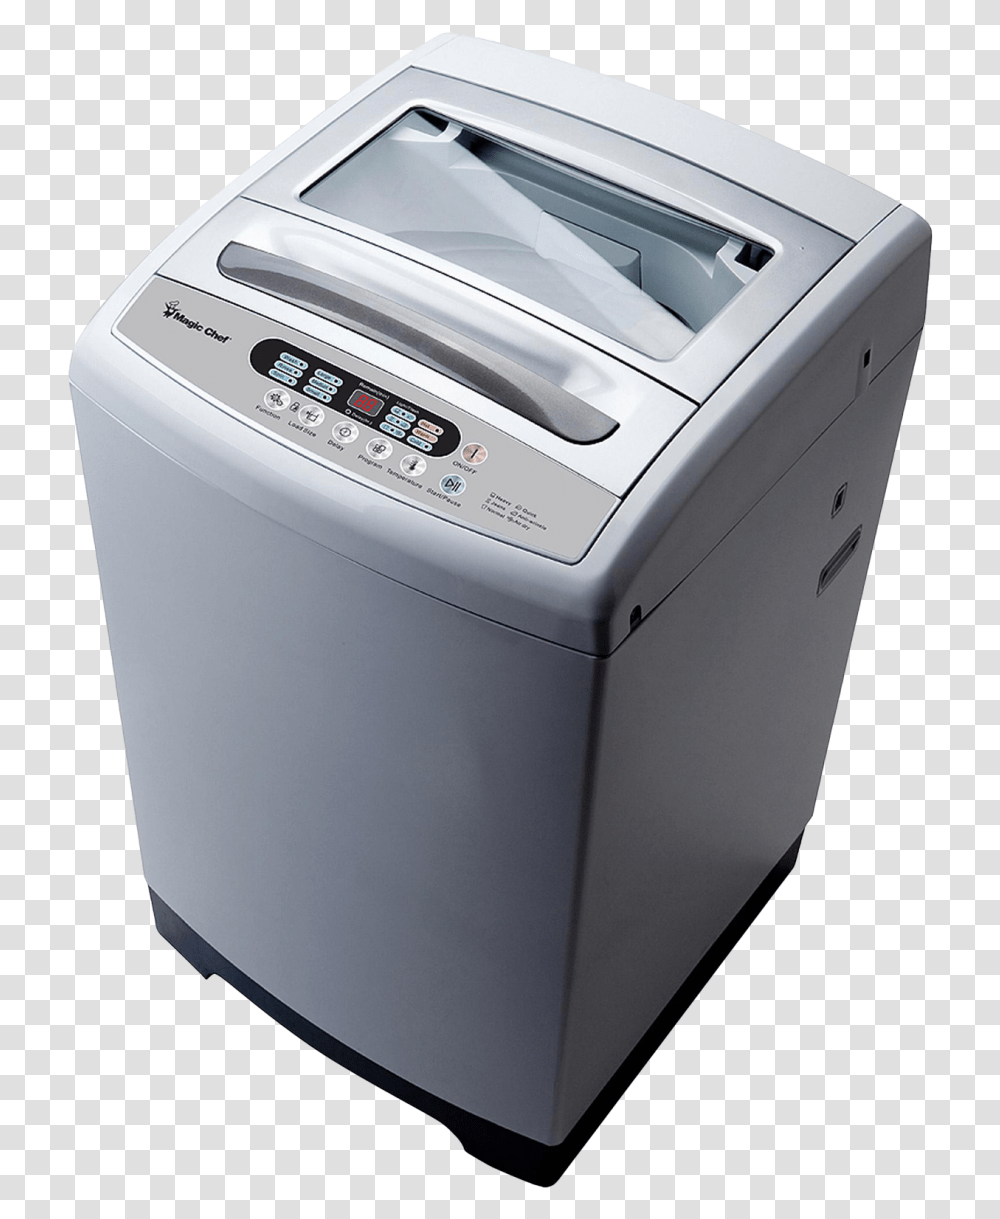 Washing Machine Top View Image Super General Automatic Washing Machine, Appliance, Washer, Mailbox, Letterbox Transparent Png